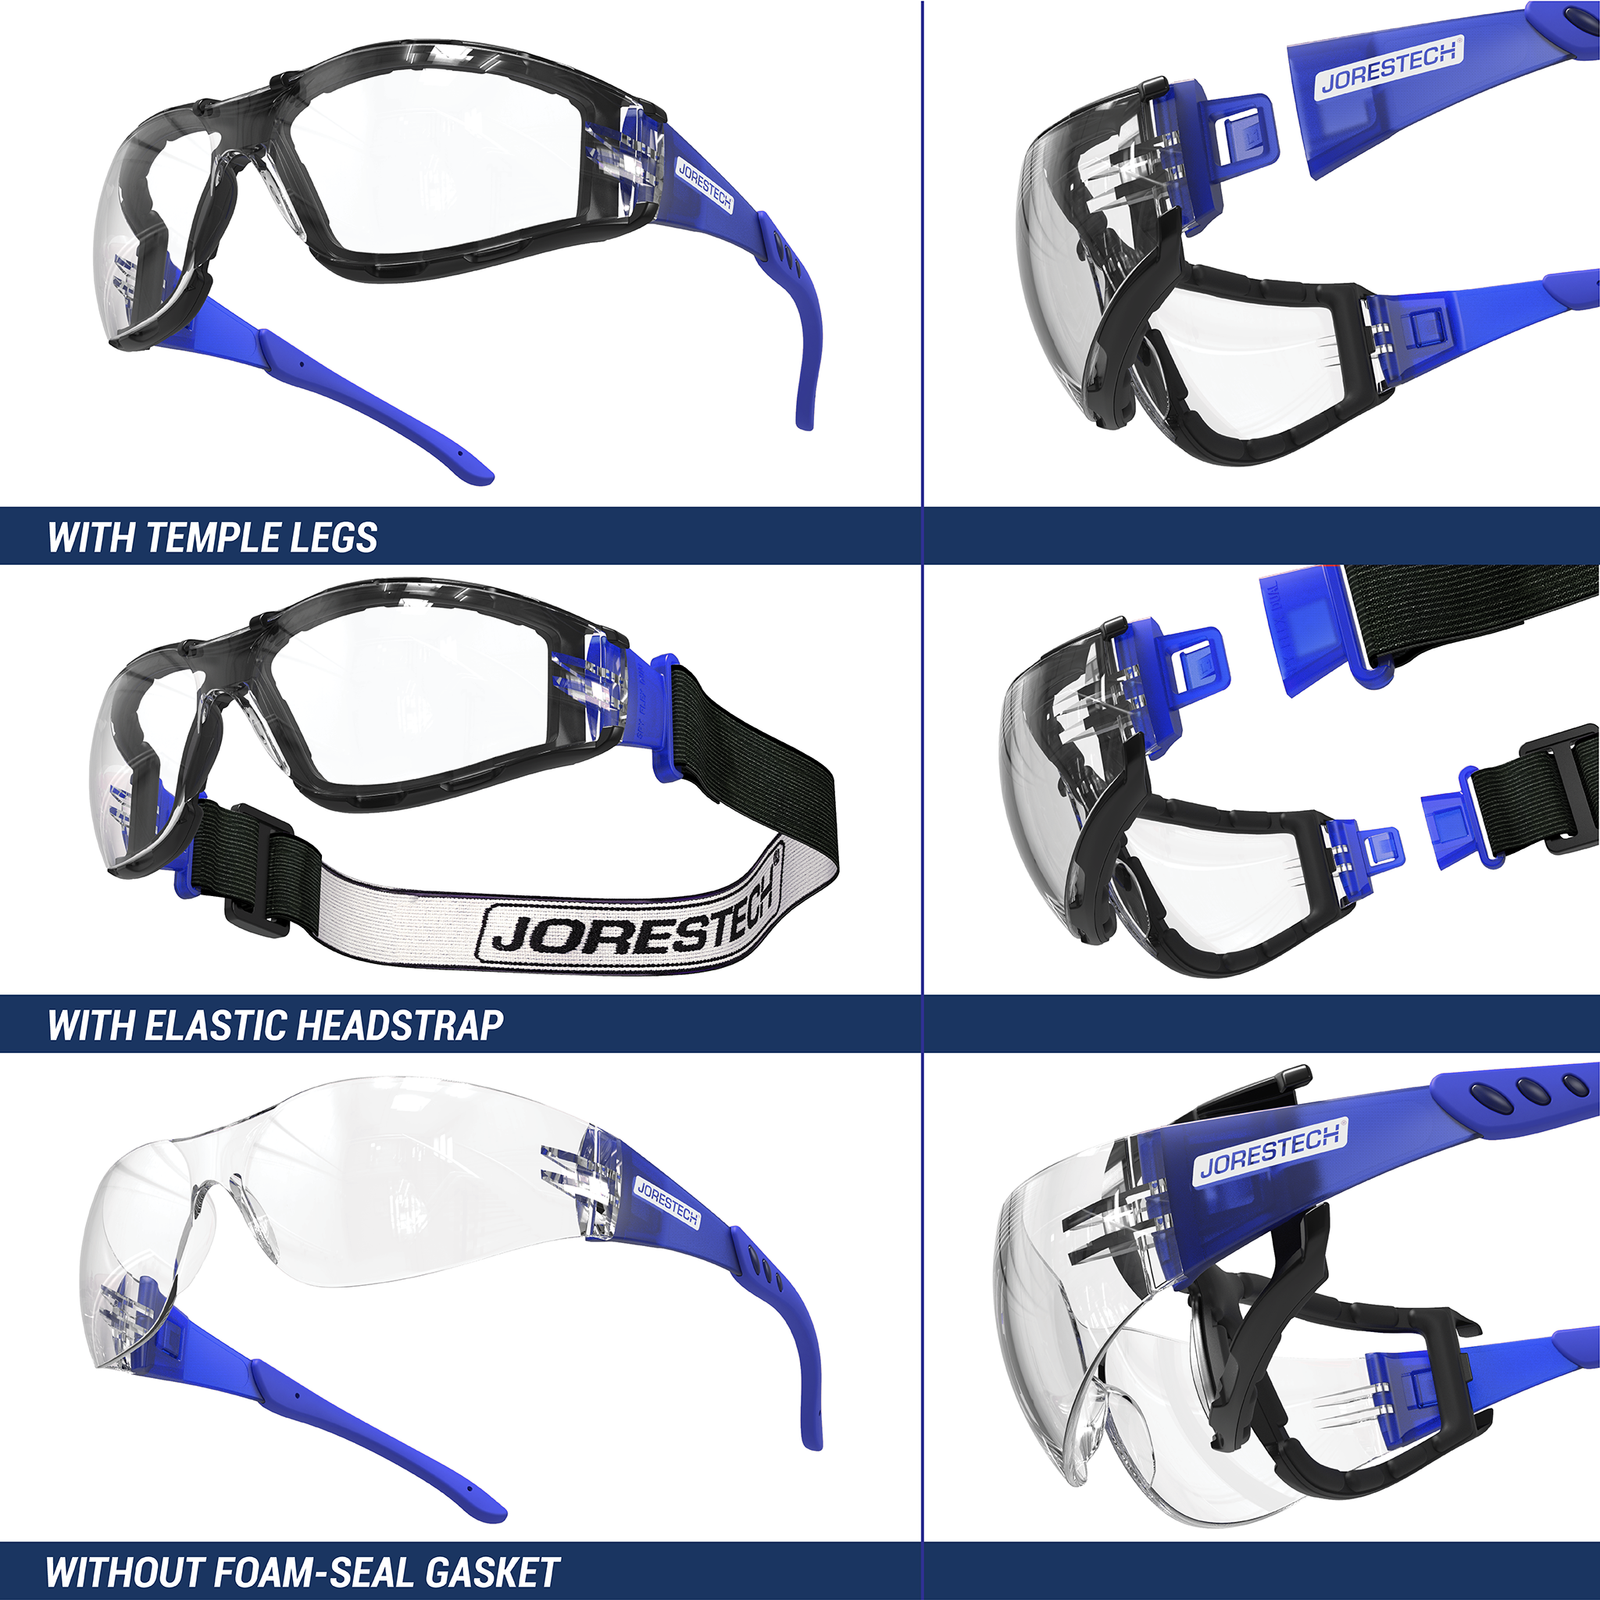 Show 3 ways how this JORESTECH high impact safety glasses can be used, which are: with temple legs, with elastic head strap, without foam seal gasket. Legs, headband and gasket are all removable